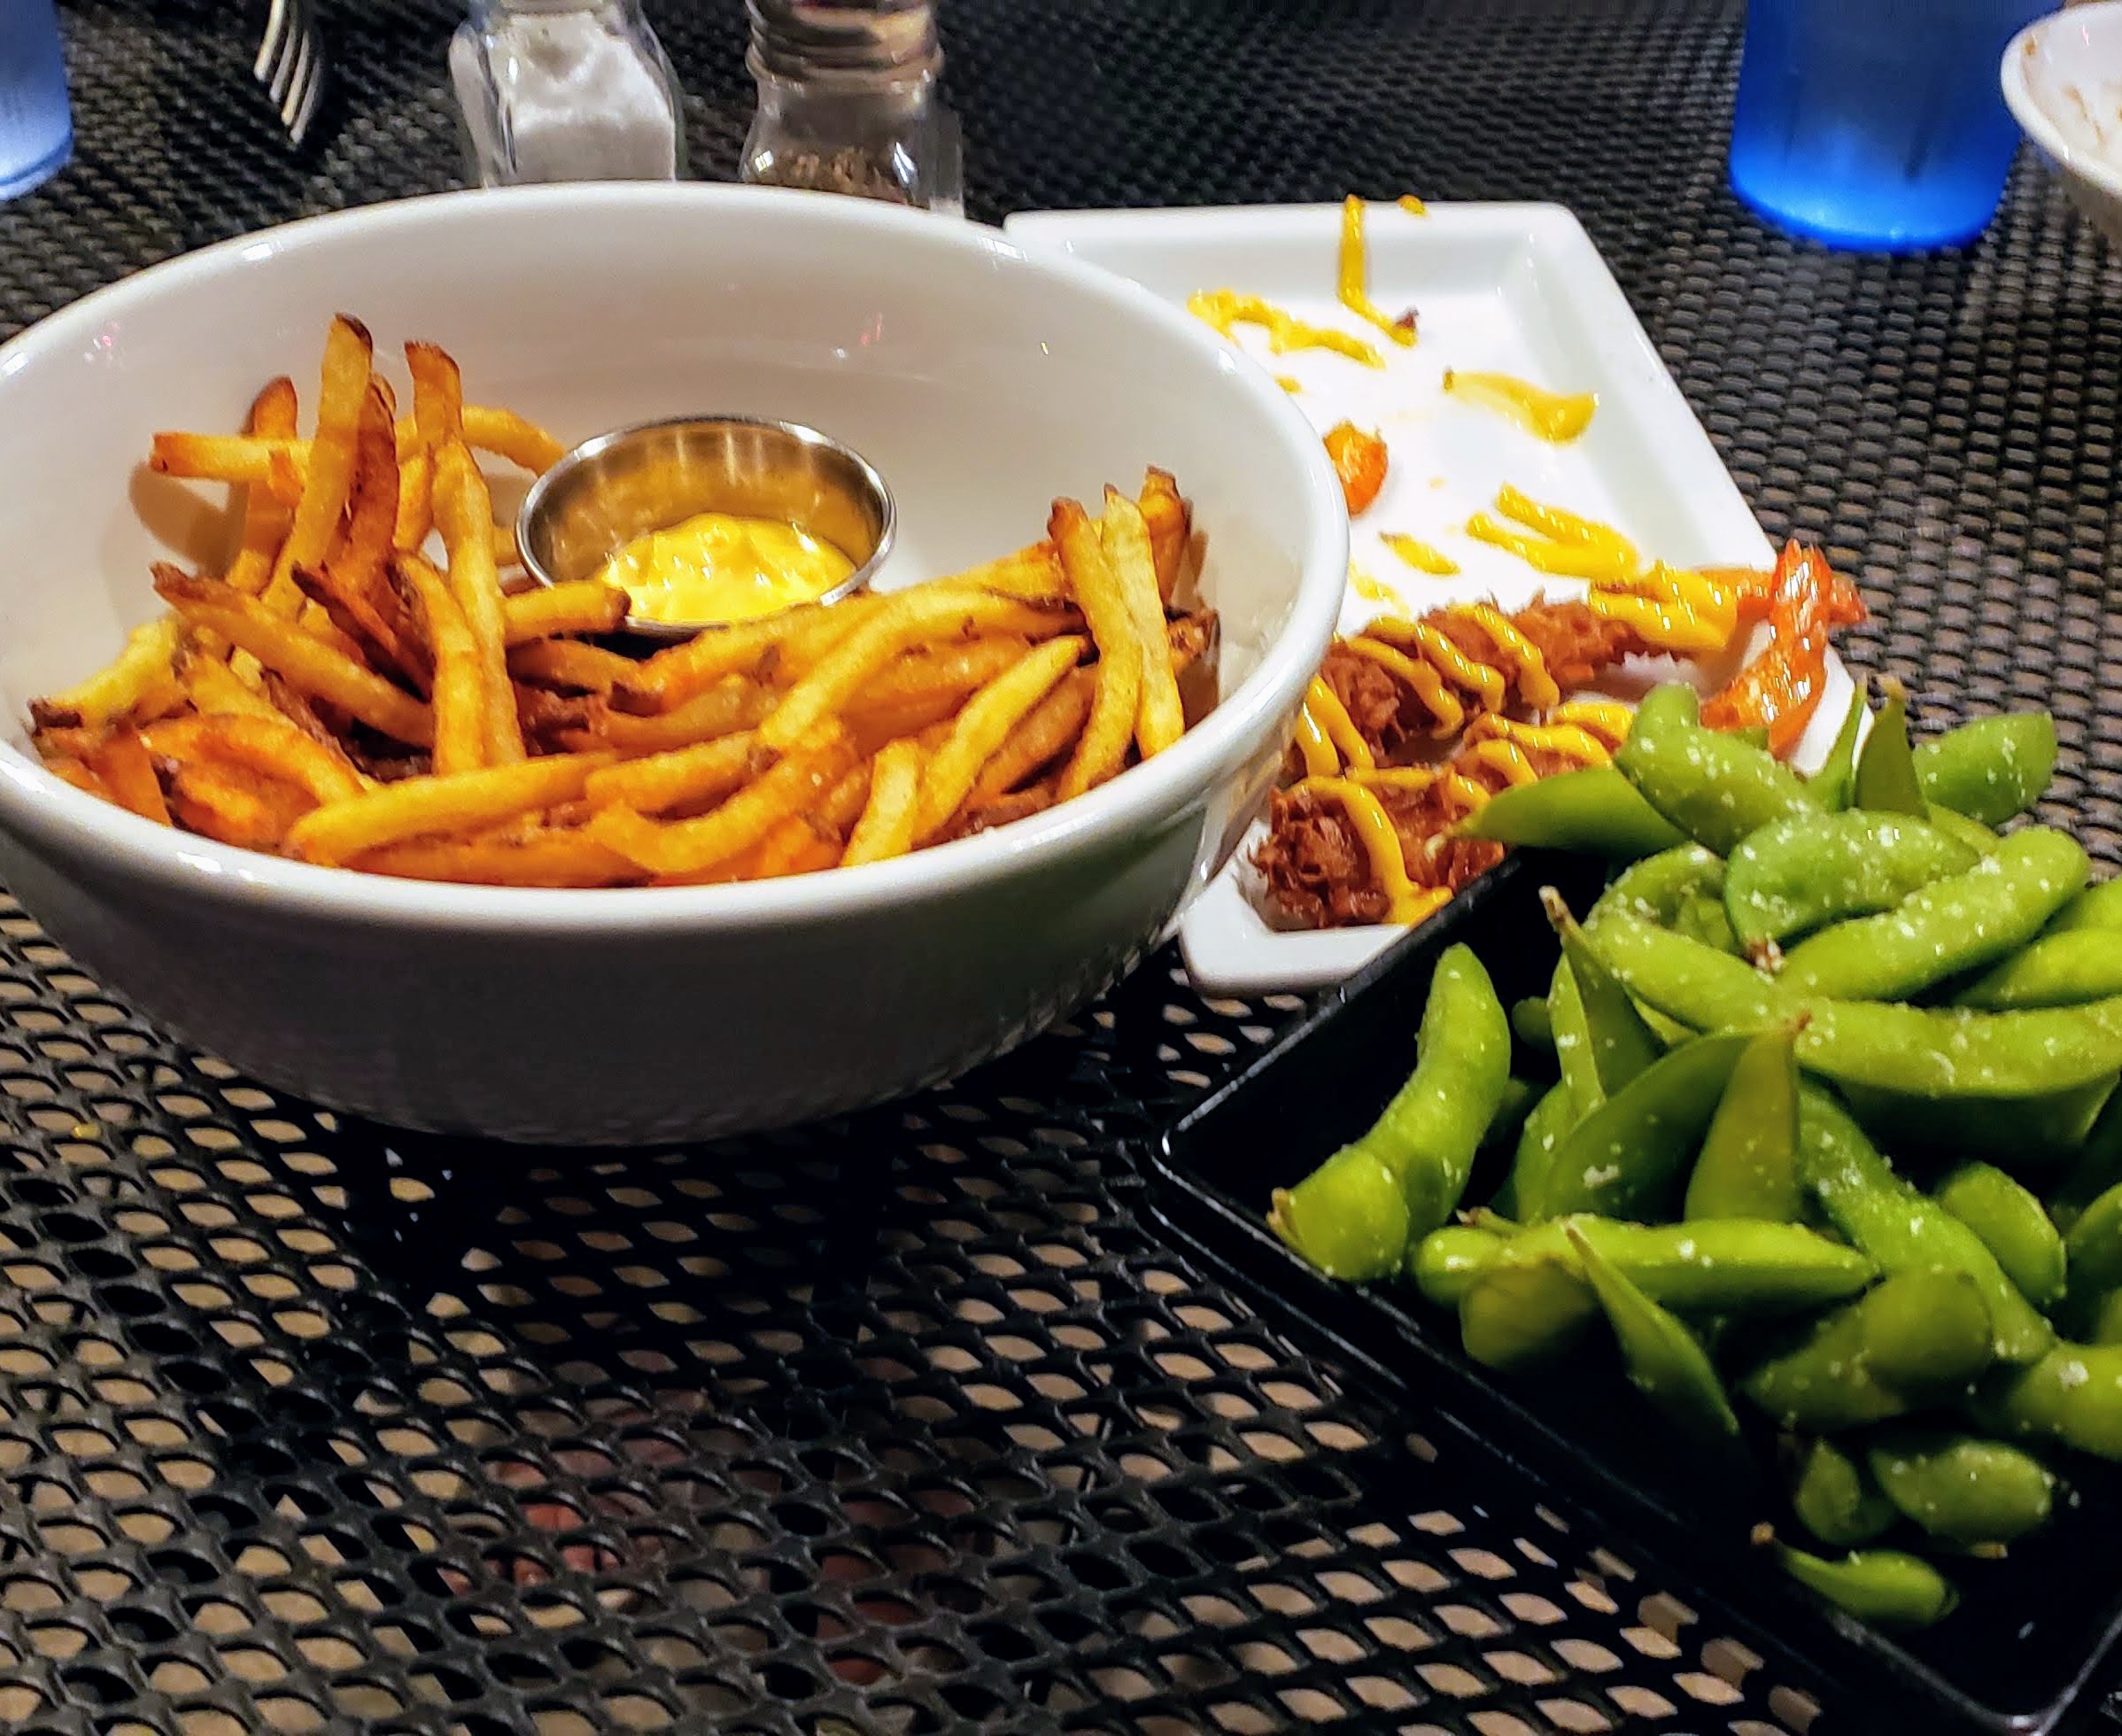 French fries, shrimp and edamame appetizers